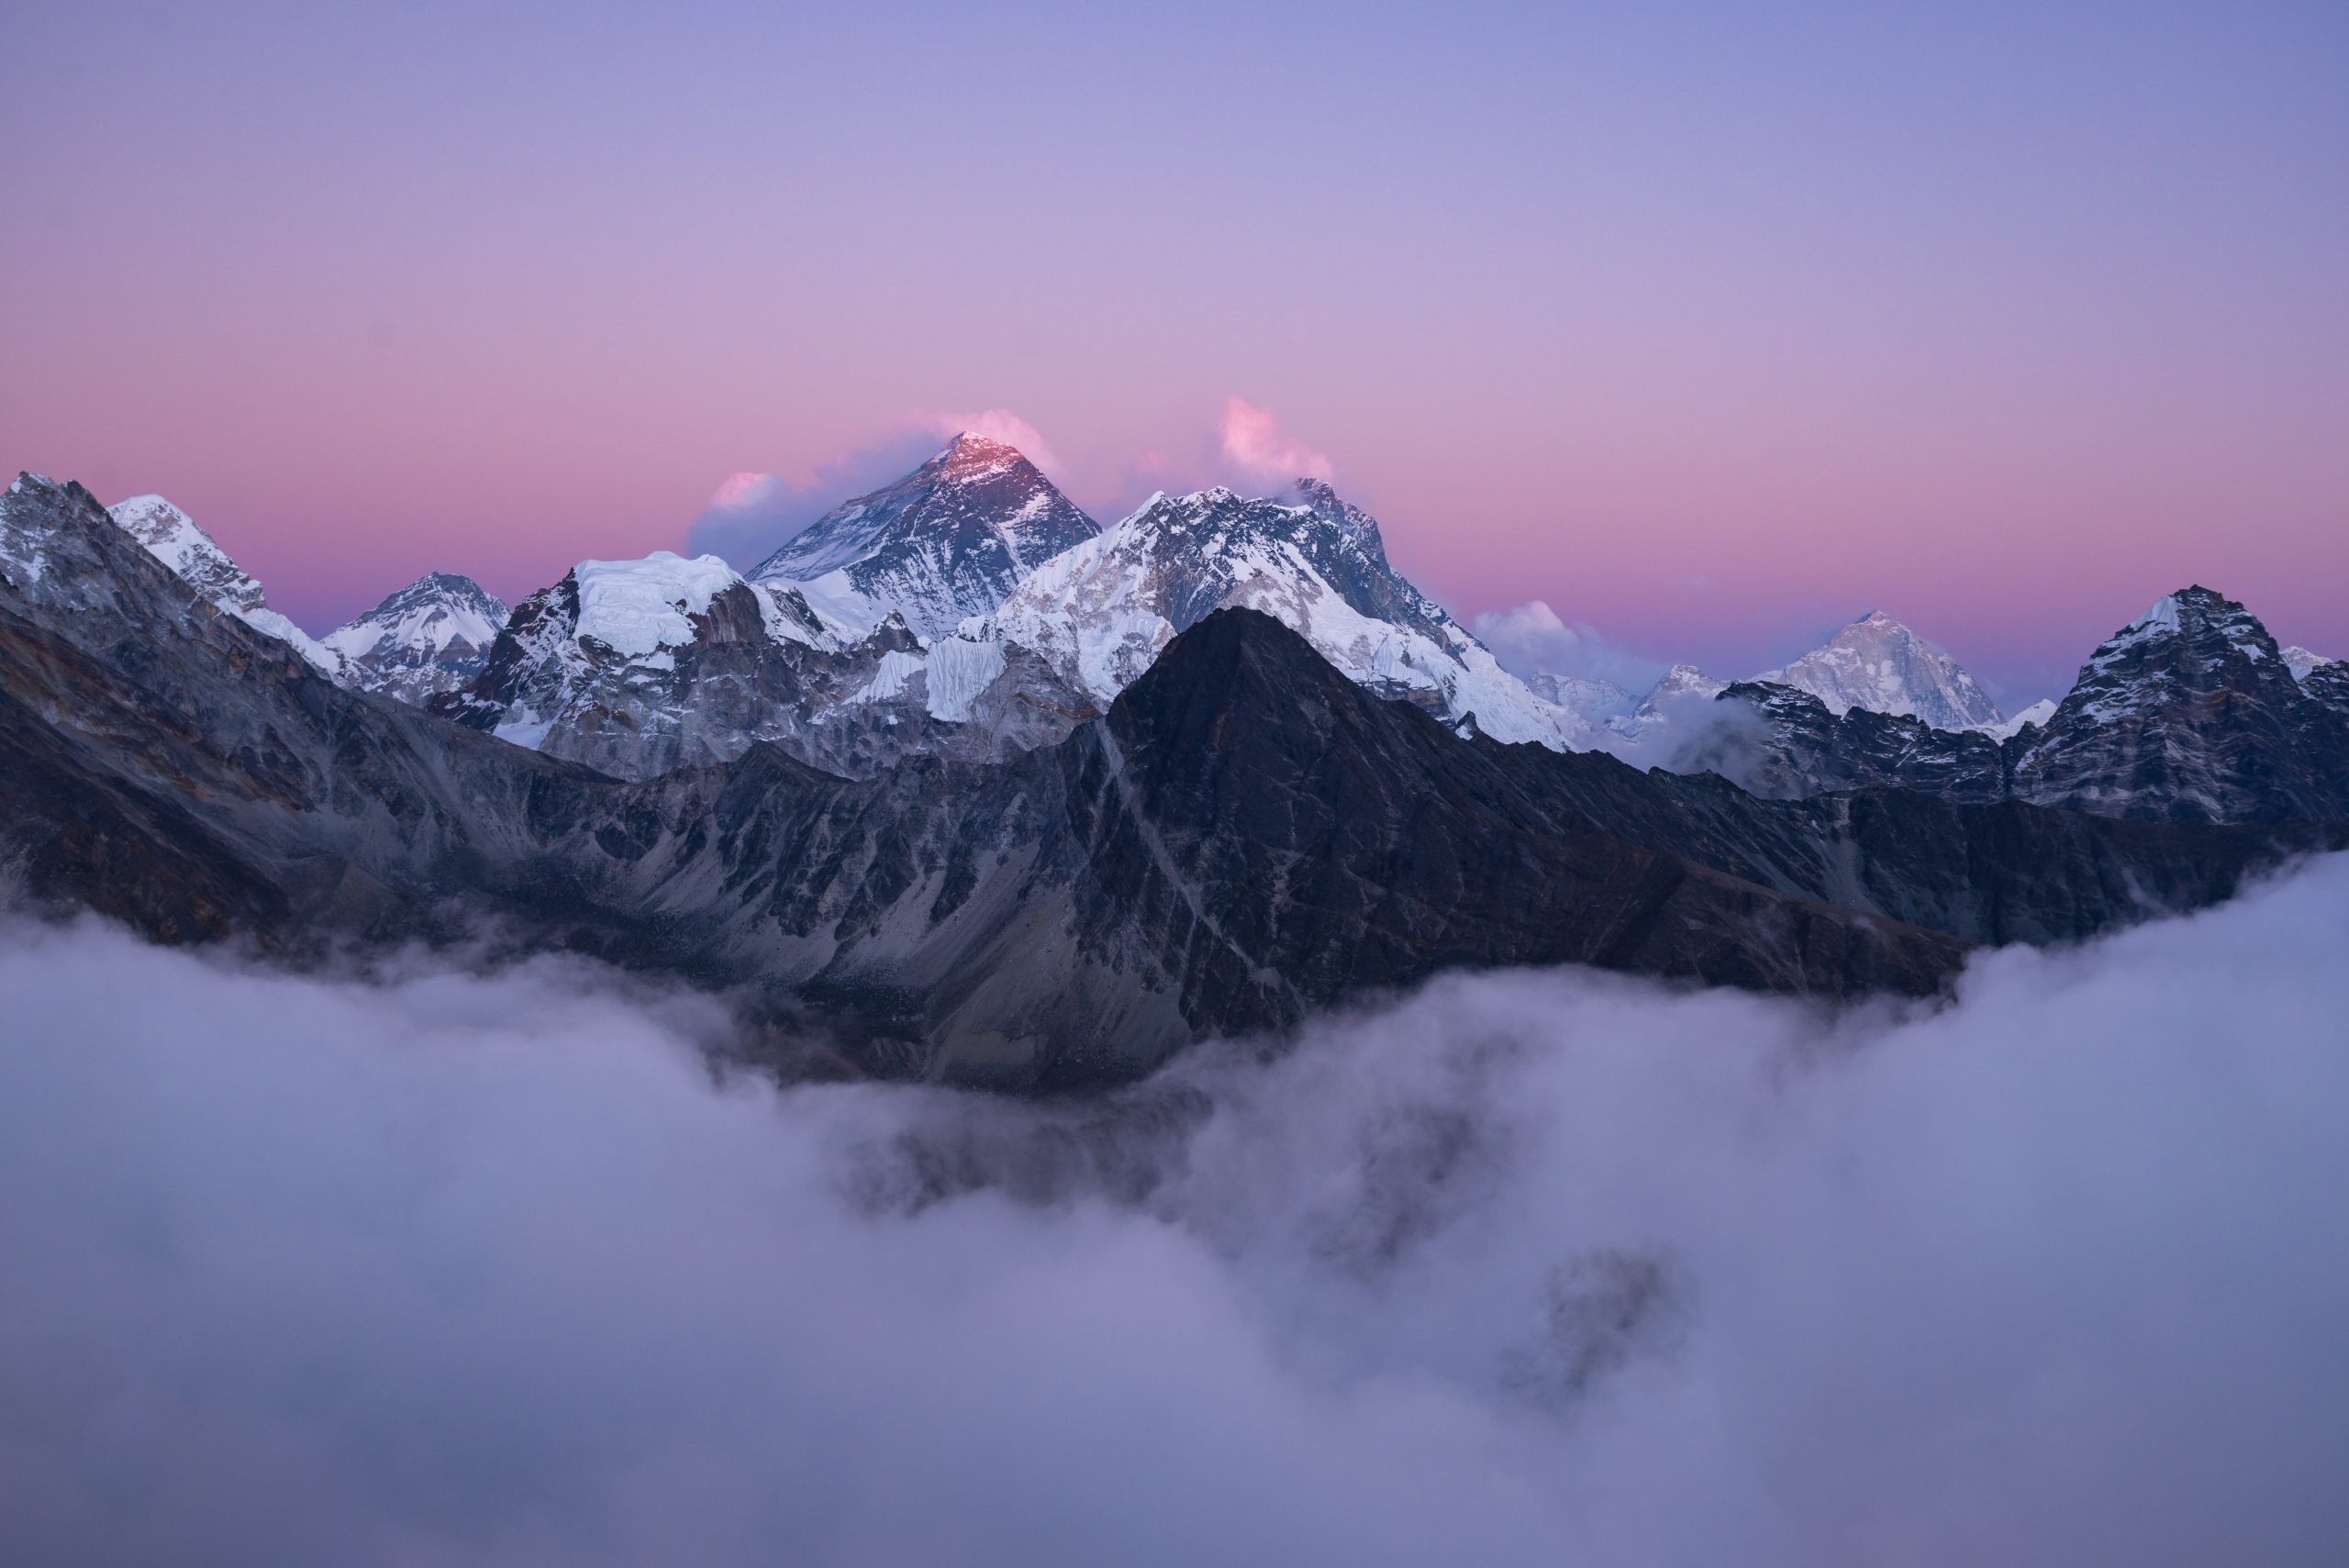 A beautiful scenery of the summit of Mount Everest covered with snow under the white clouds